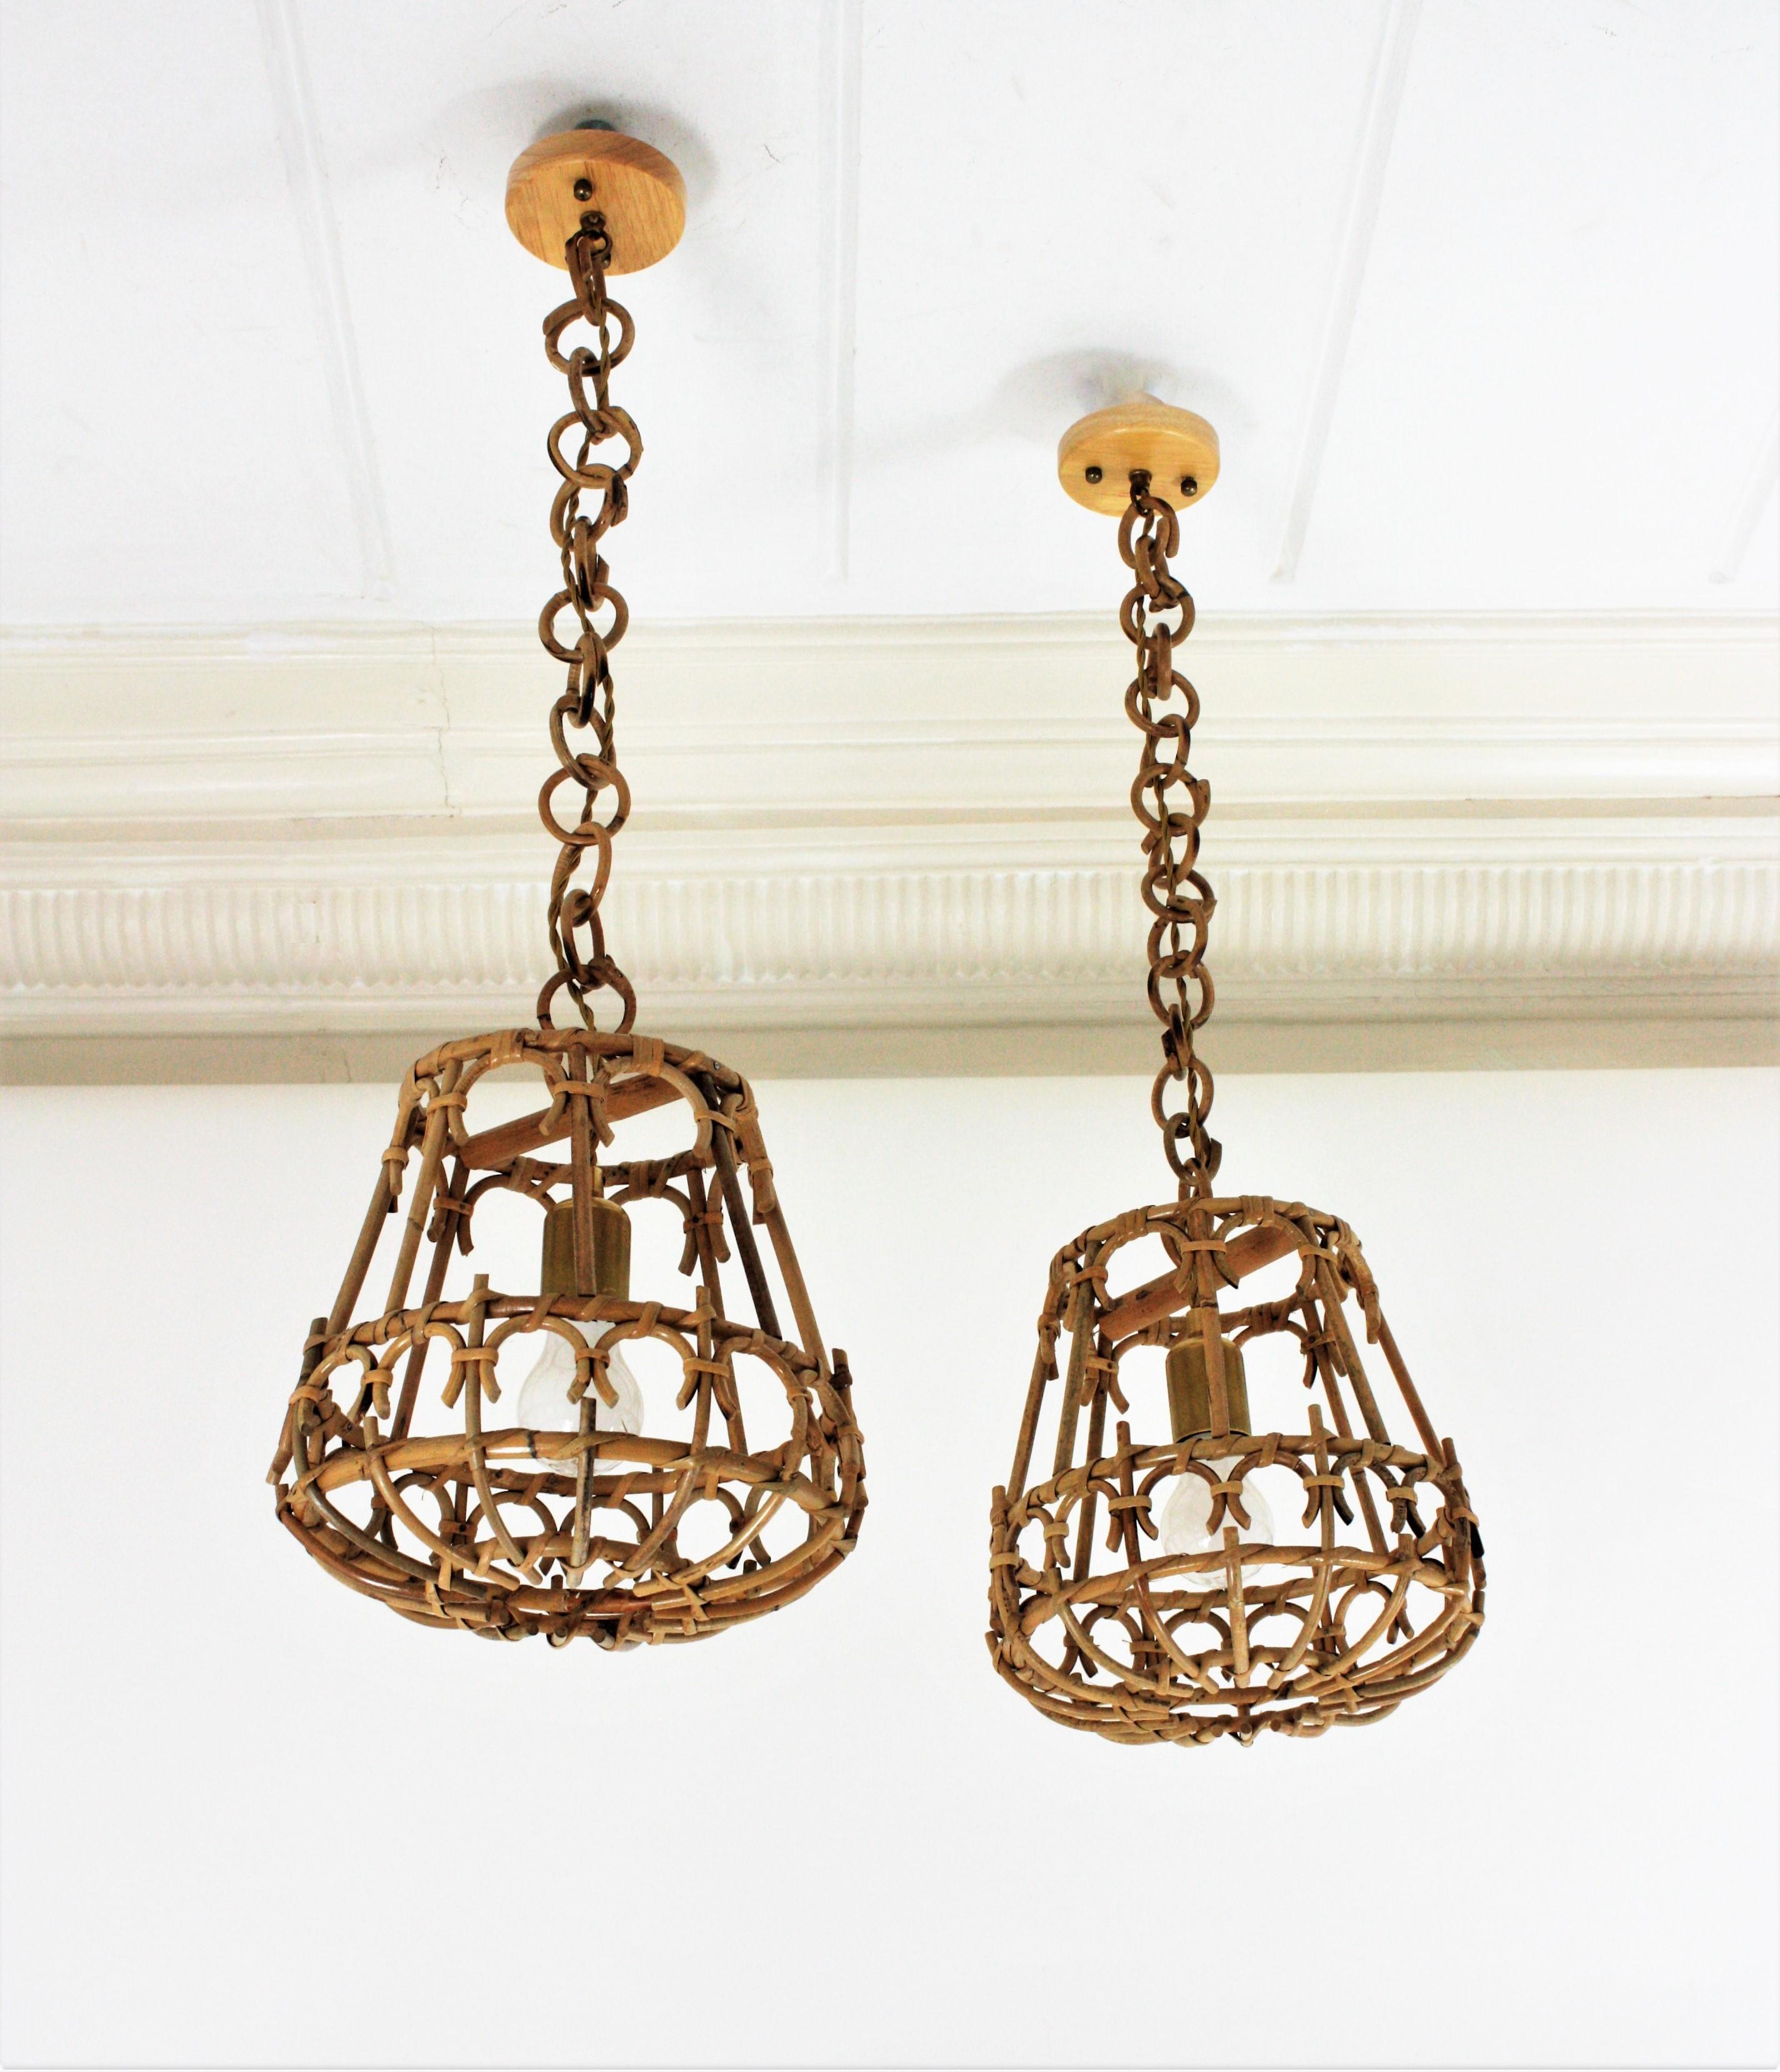 A cool pair of handcrafted rattan conical ceiling suspension lamps. Spain, 1960s
These rattan lanterns have an eye-catching design featuring a conical rattan structure with geometric semi-circles decorations and vertical sticks.
Each one hangs